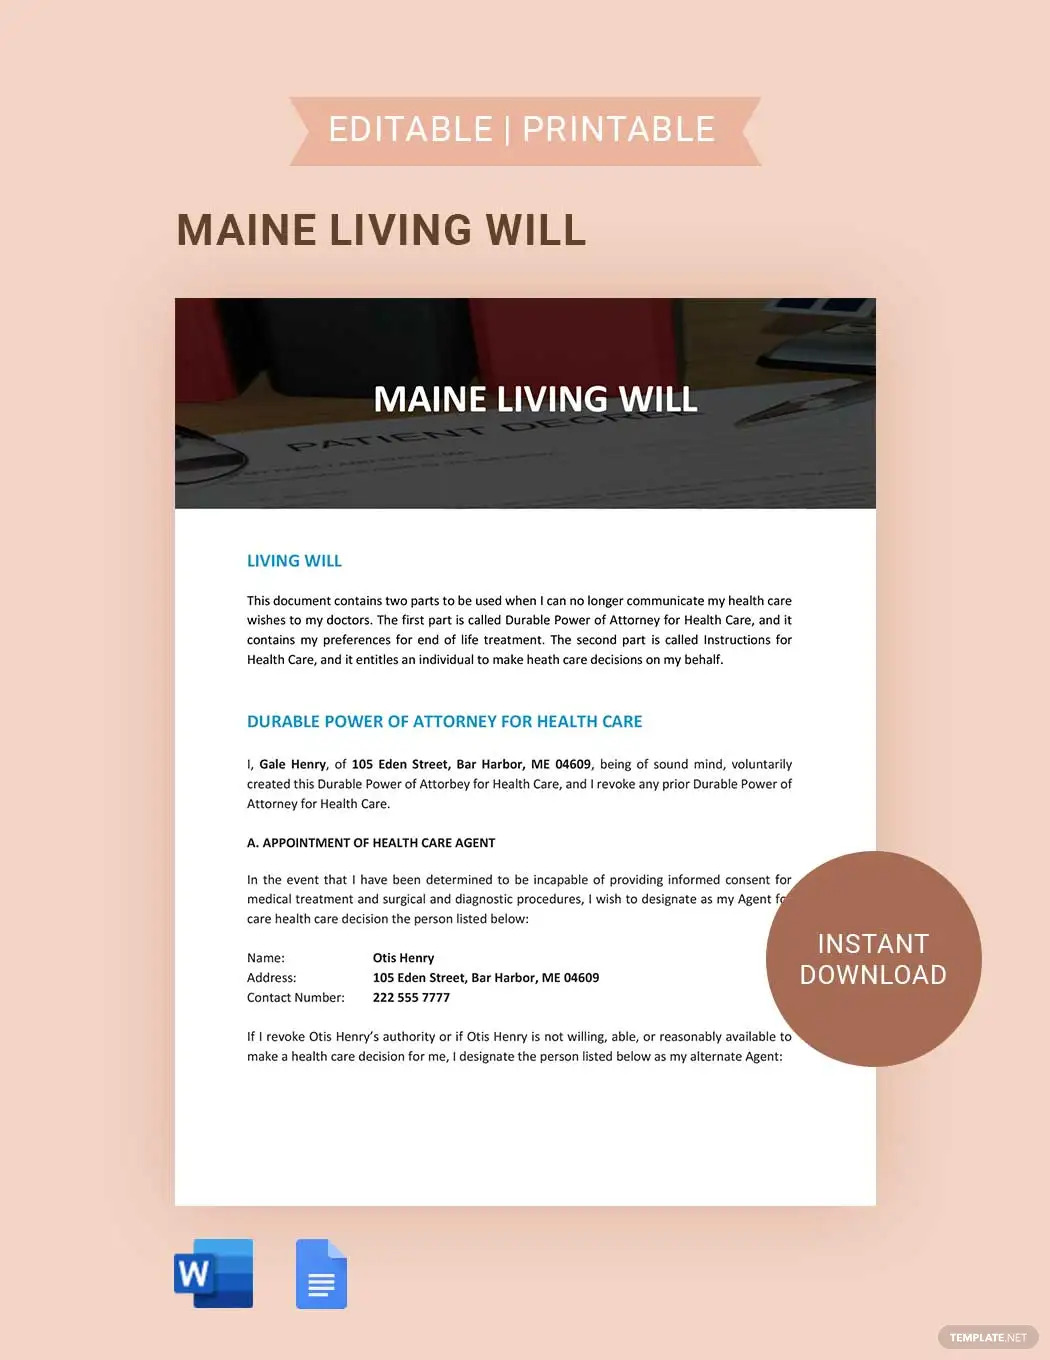 maine-living-will-ideas-and-examples